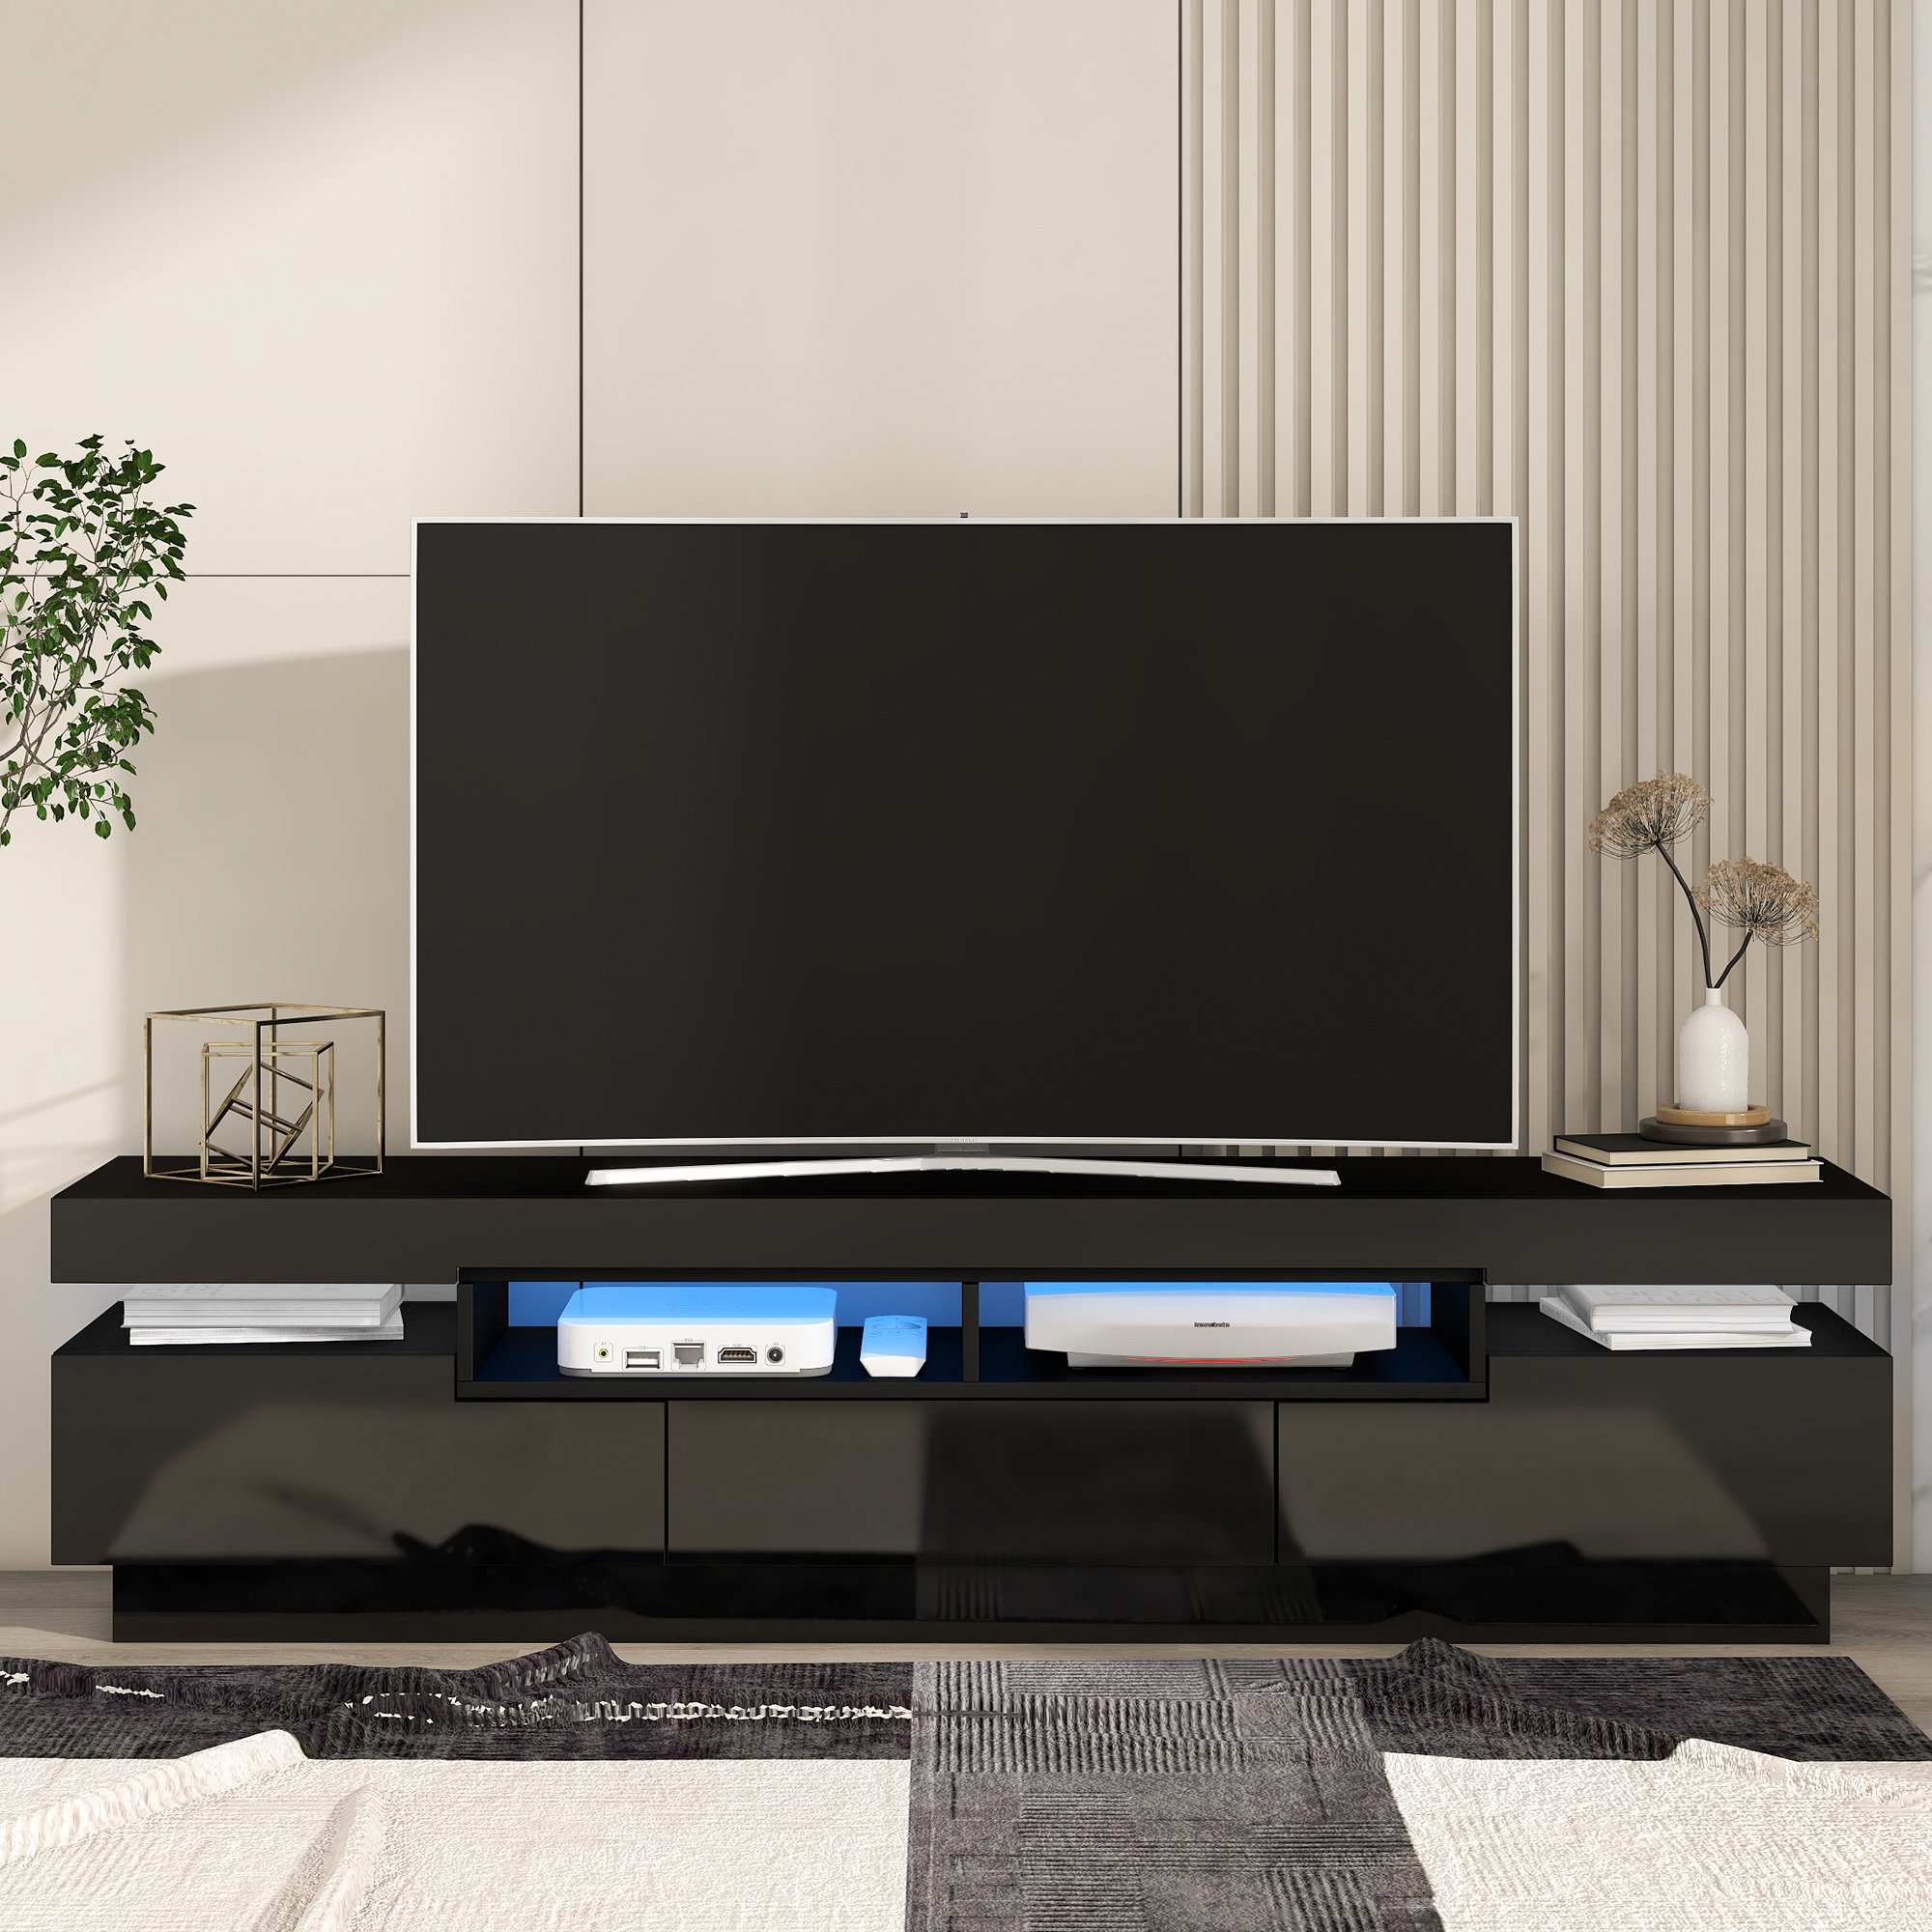 On-Trend TV Stand with 4 Open Shelves, Modern High Gloss Entertainment Center for 75 Inch TV, Univer